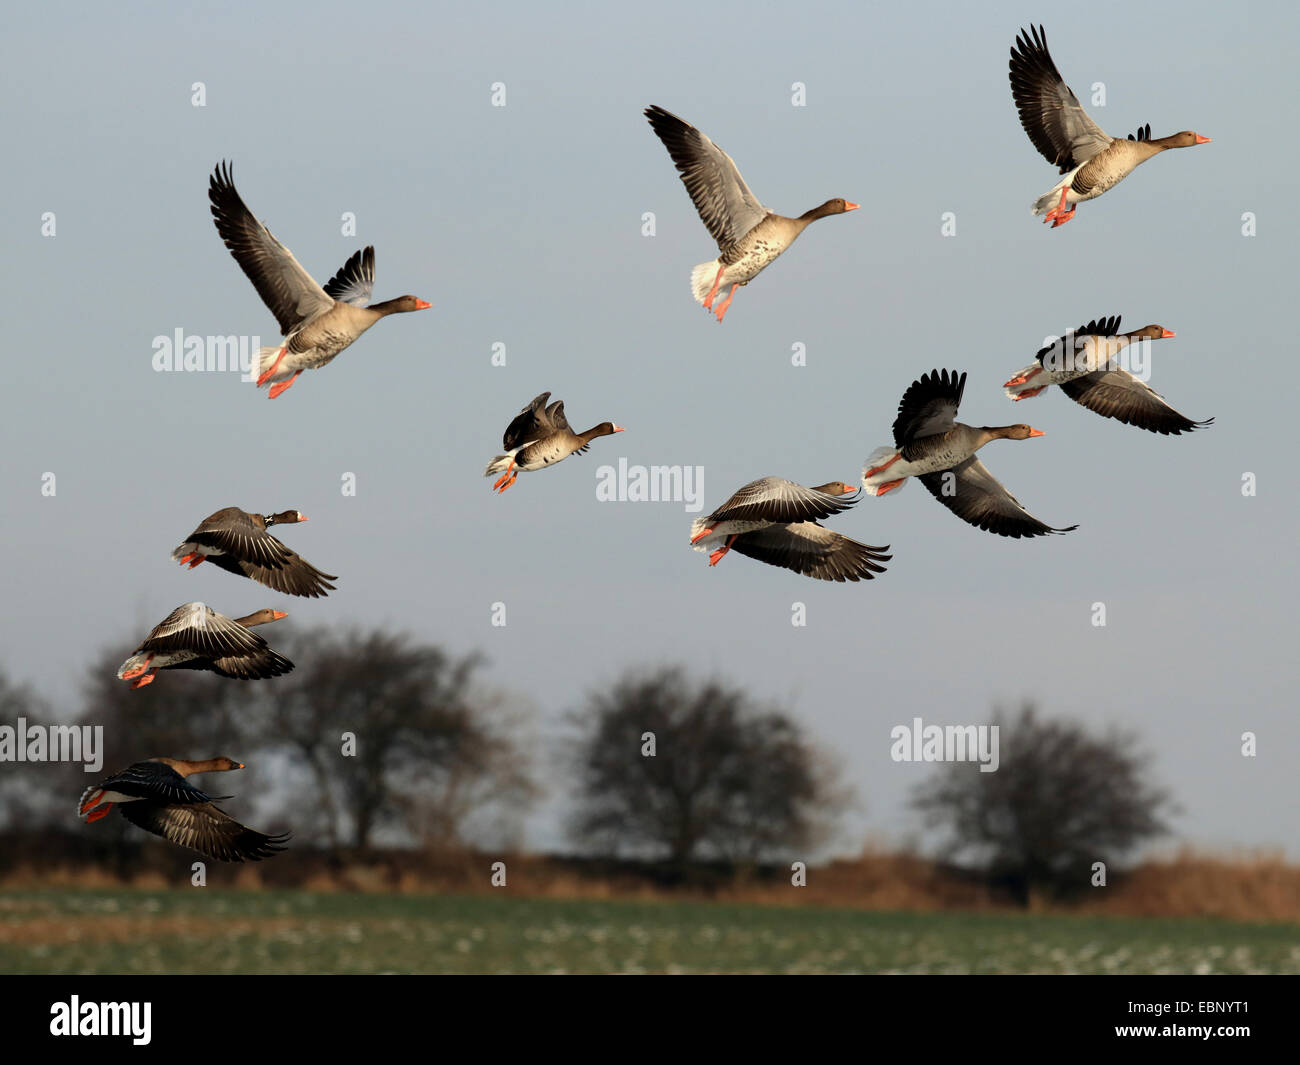 greylag goose (Anser anser), flying flock together with two white-fronted geese, Germany, Brandenburg, Unteres Odertal National Park Stock Photo